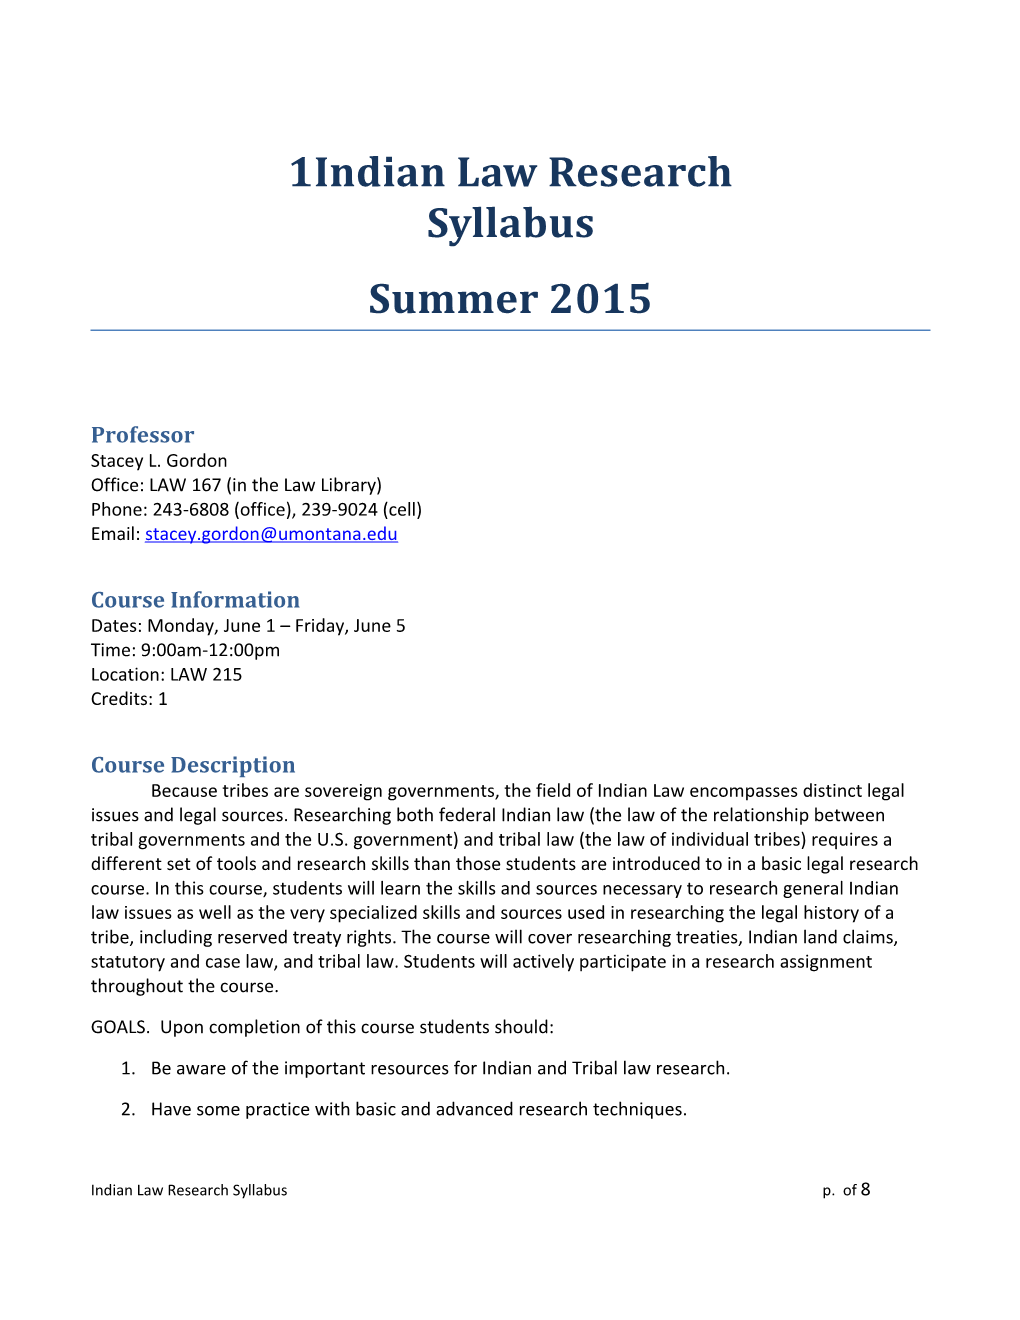 Indian Law Research Syllabus